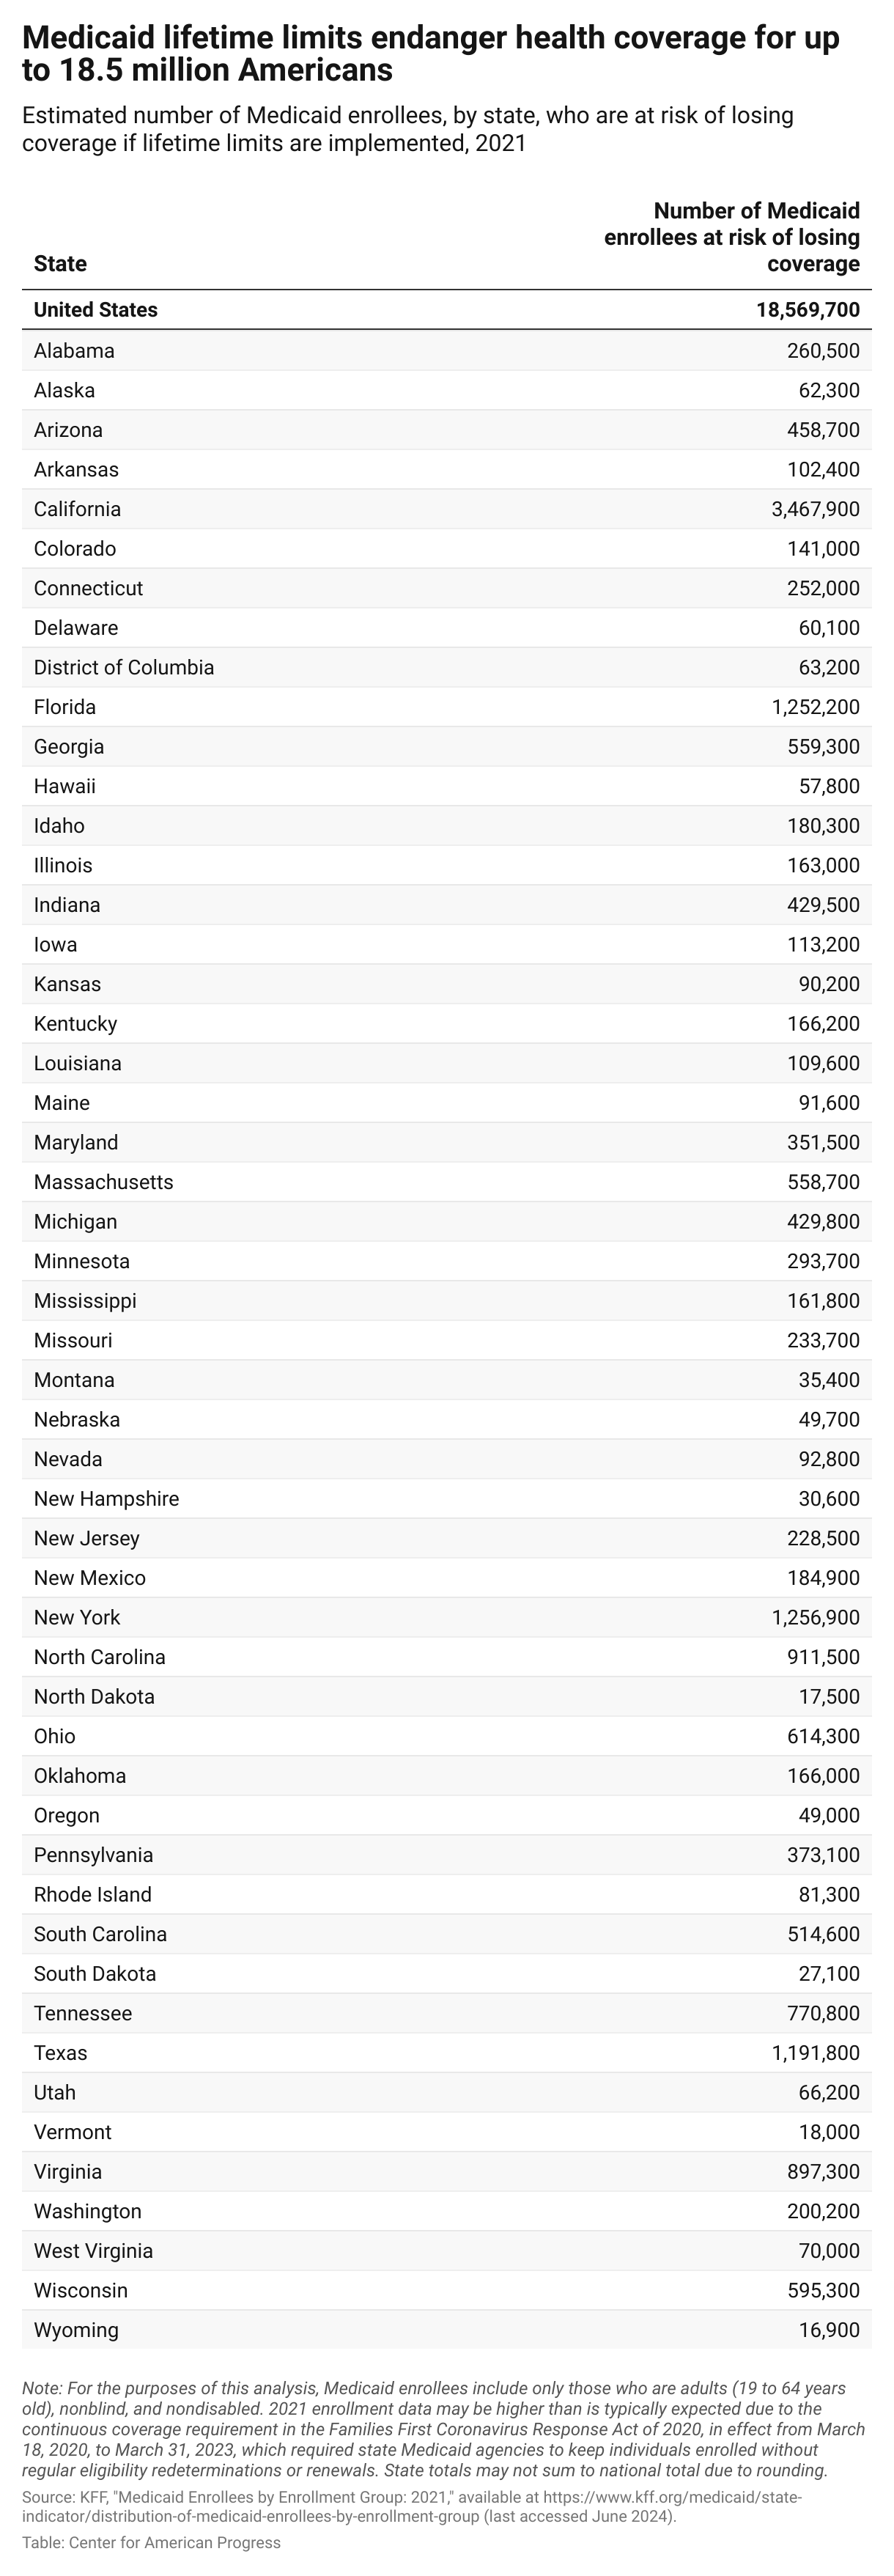 Table that estimates the number of 2021 Medicaid enrollees, by state, who are at risk of losing coverage if lifetime limits are implemented. The total number in the United States is 18,569,700.